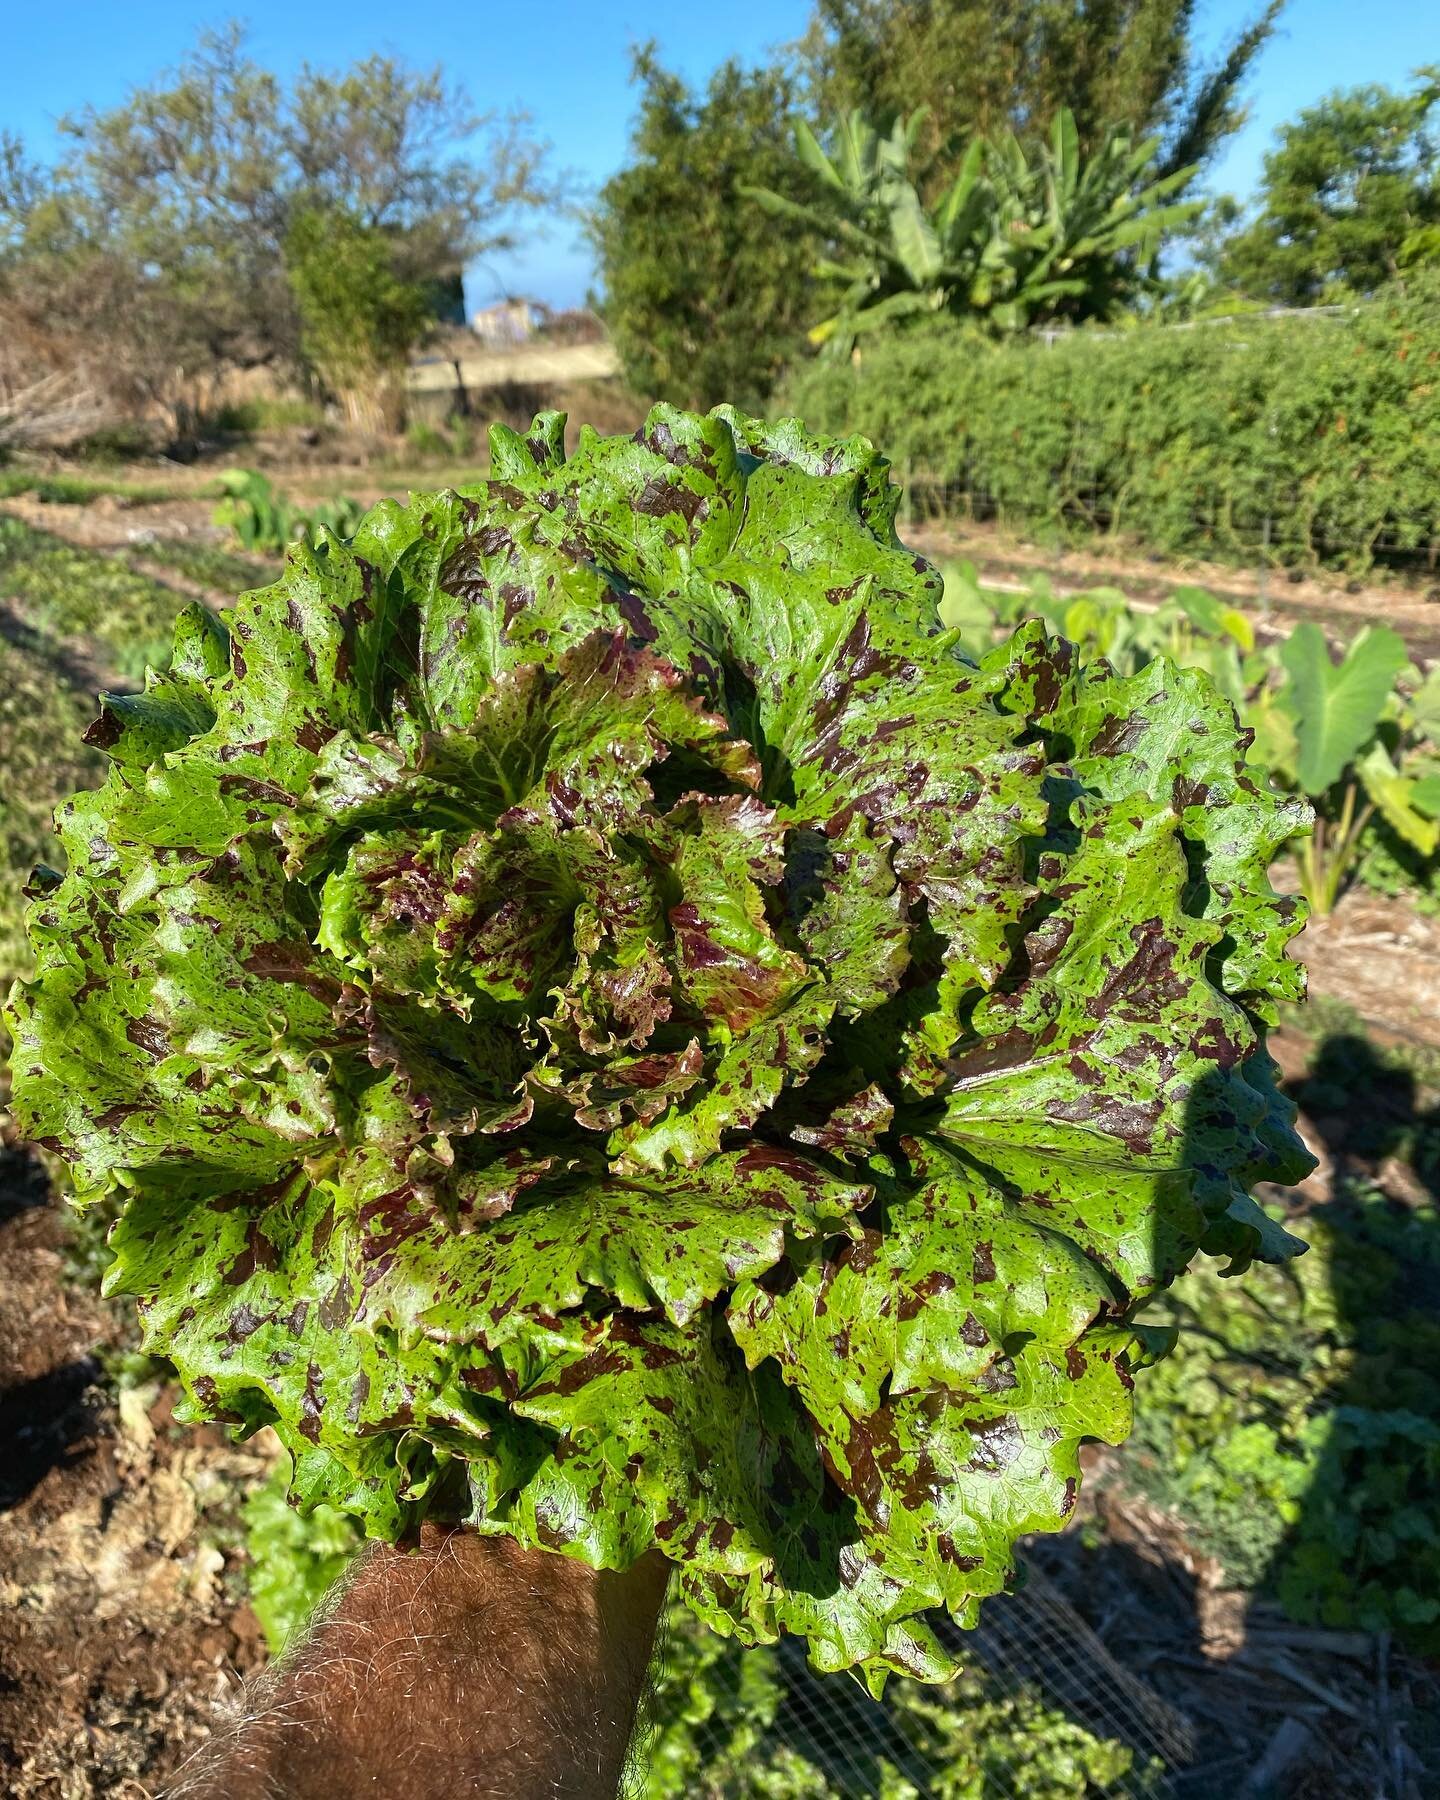 Kilauea lettuce handling the heat! Mind you we don&rsquo;t have the heat like the south @rosecreekfarms but getting well filled tasty heads is a challenge in the summer. Hats off to Frank Morton @wild_garden_seed for breeding this winner!! Try it, yo